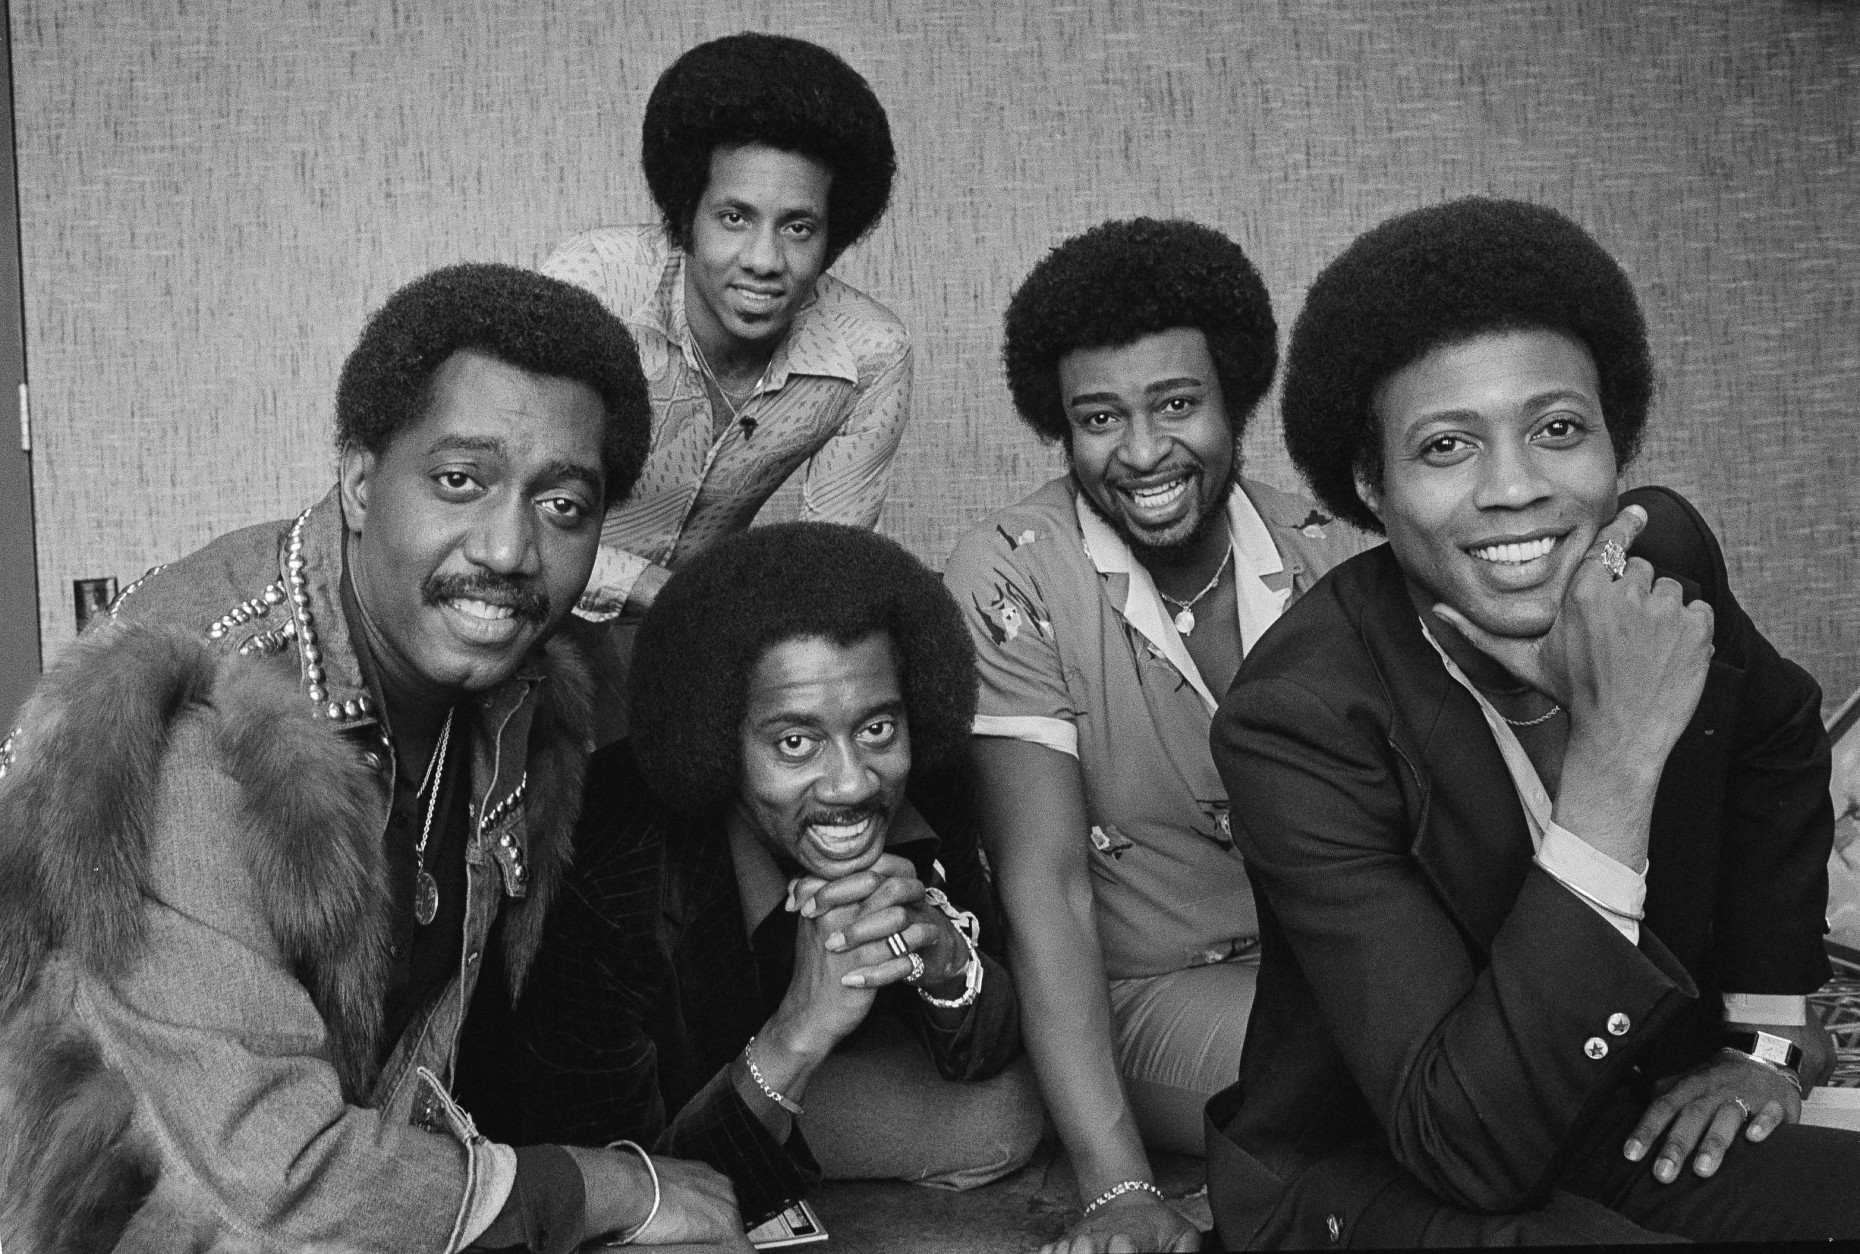 The Temptations singing group. From left are; Otis Williams, Melvin Franklin and Glenn Beonard. Back row from left, Richard Street and Dennis Edwards. (AP Photo/Lennox McLendon)